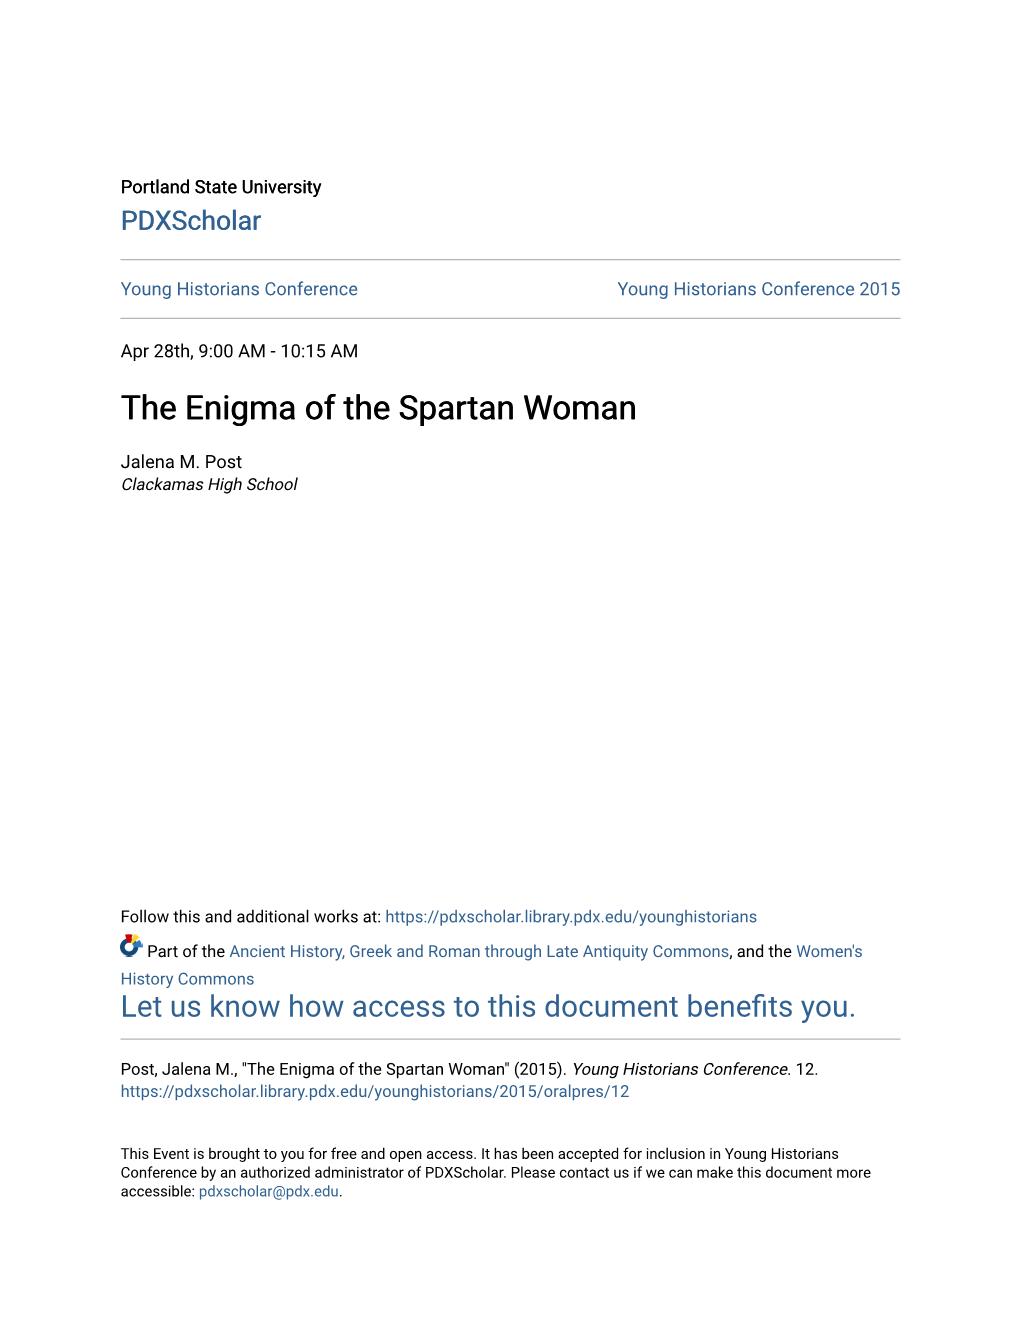 The Enigma of the Spartan Woman